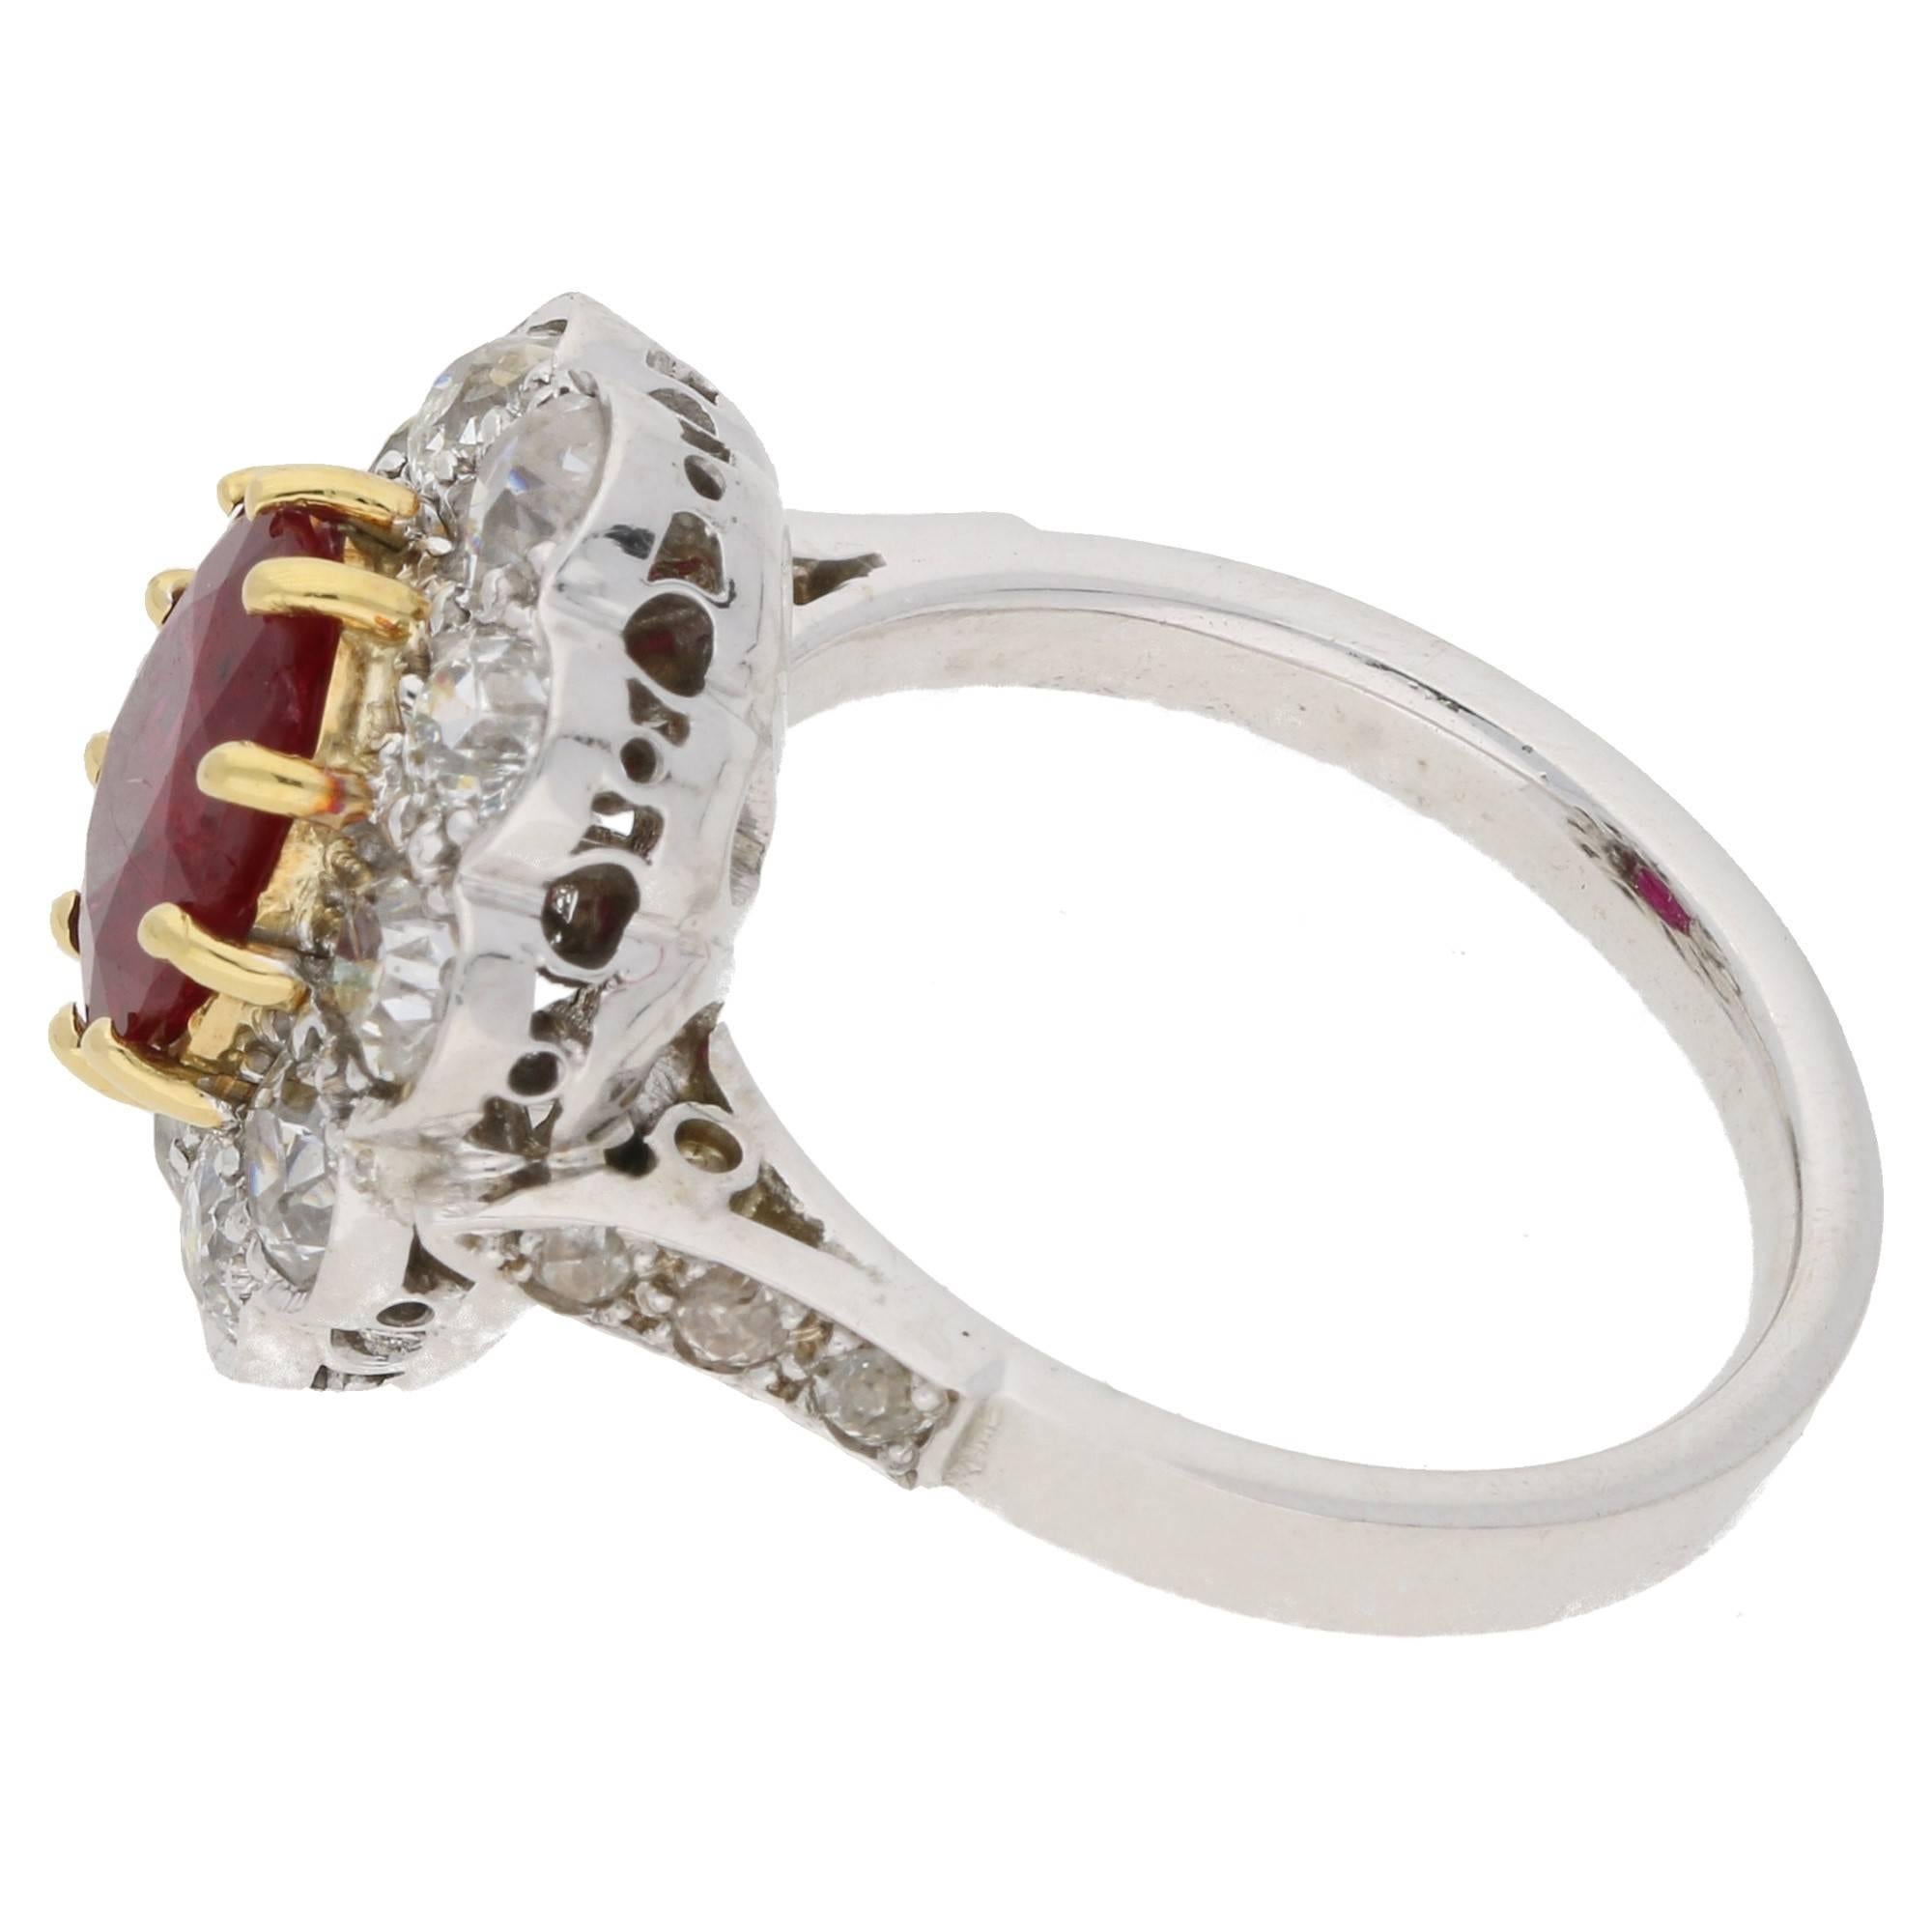 A beautiful red oval cut Thai ruby and diamond cluster ring set in 18ct yellow gold and platinum. 
The centrally set oval faceted Thai ruby is set in a ten-claw 18ct yellow gold mount, and is haloed by ten old European cut diamonds; these are set in